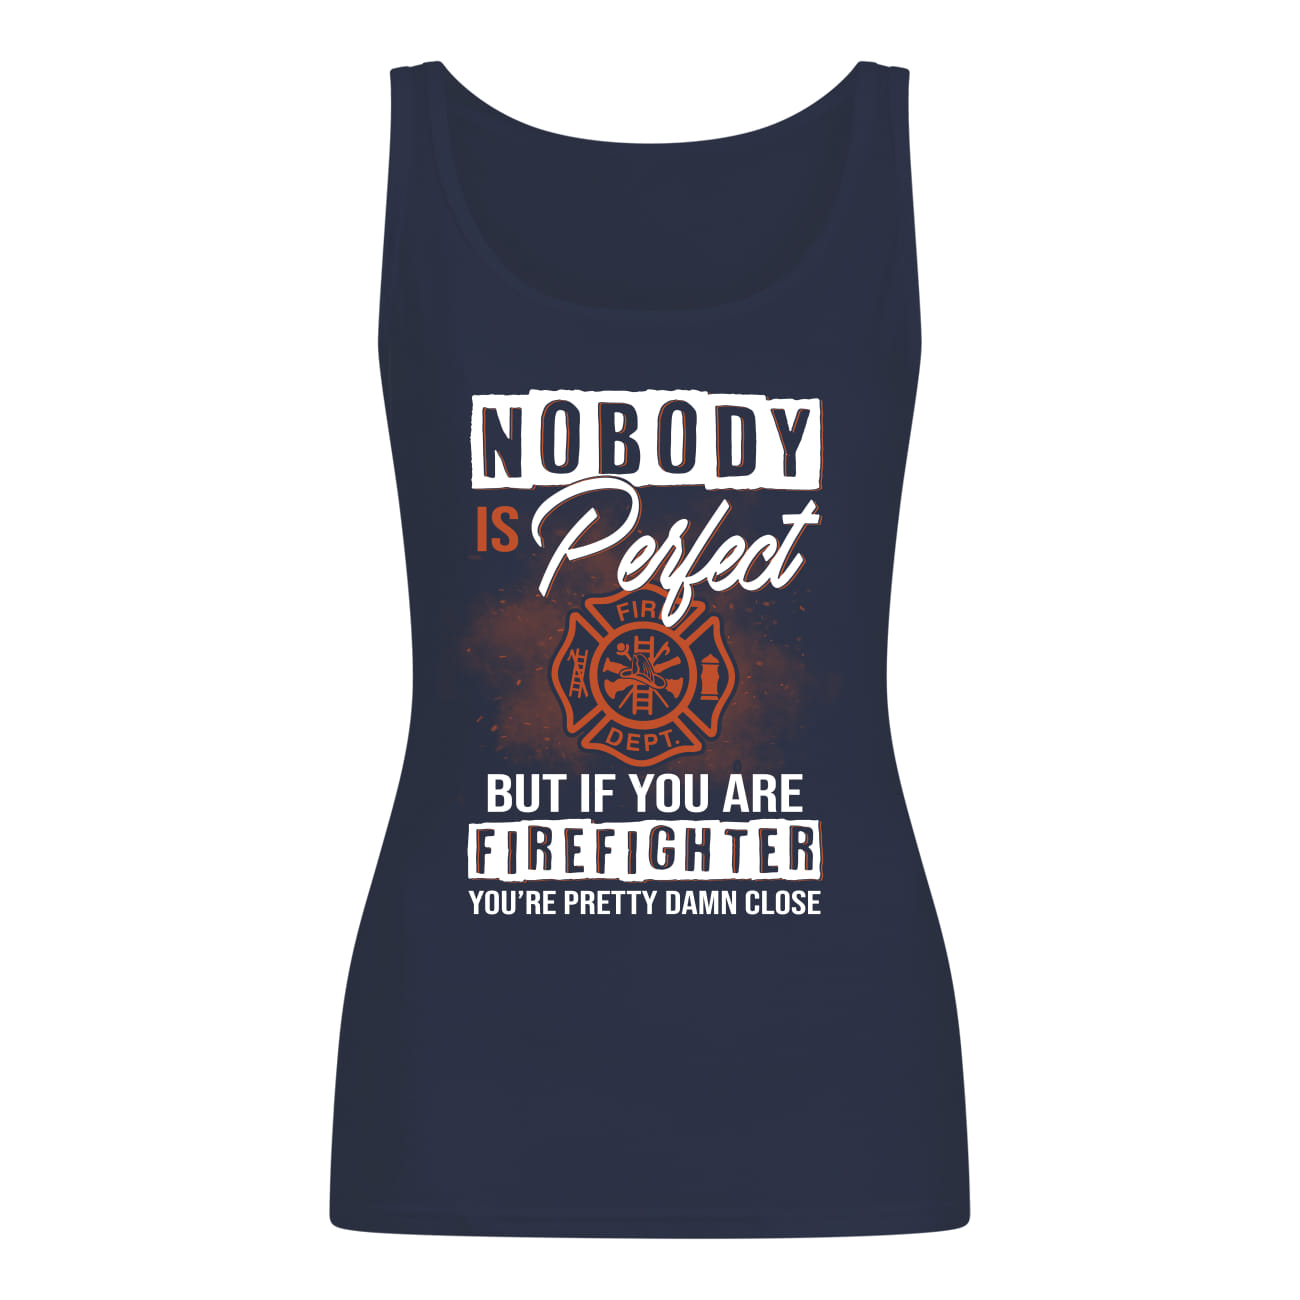 Nobody is perfect but if you are firefighter you're pretty damn close tank top